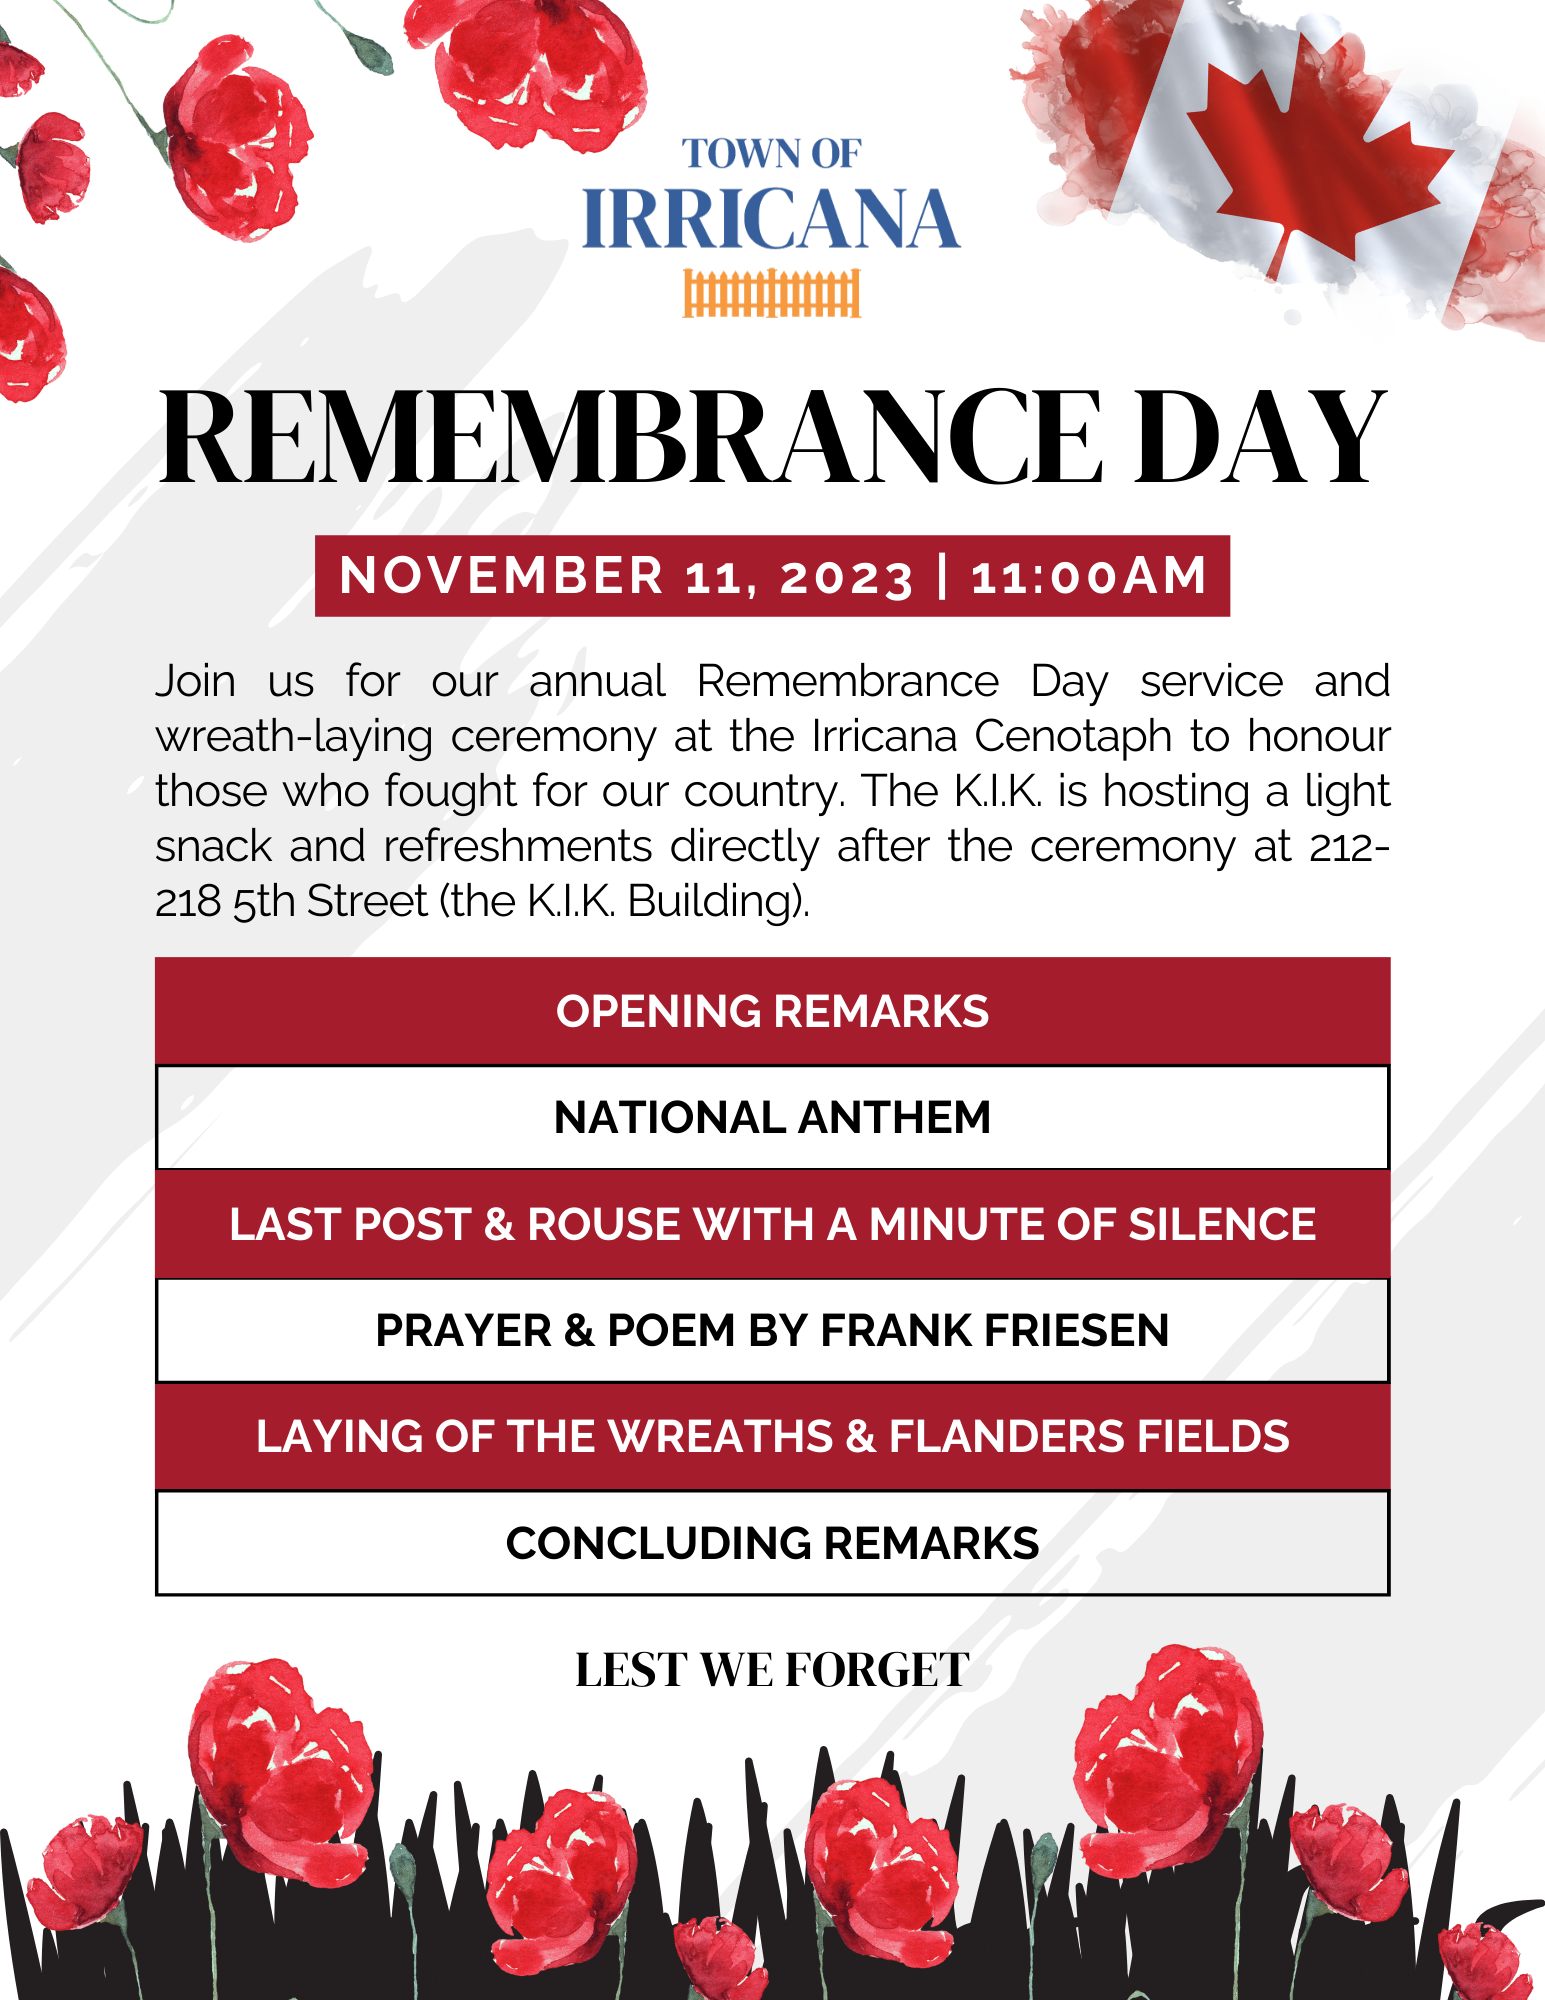 Town of Irricana Remembrance Day Ceremony, Saturday, November 11 at 11:00am